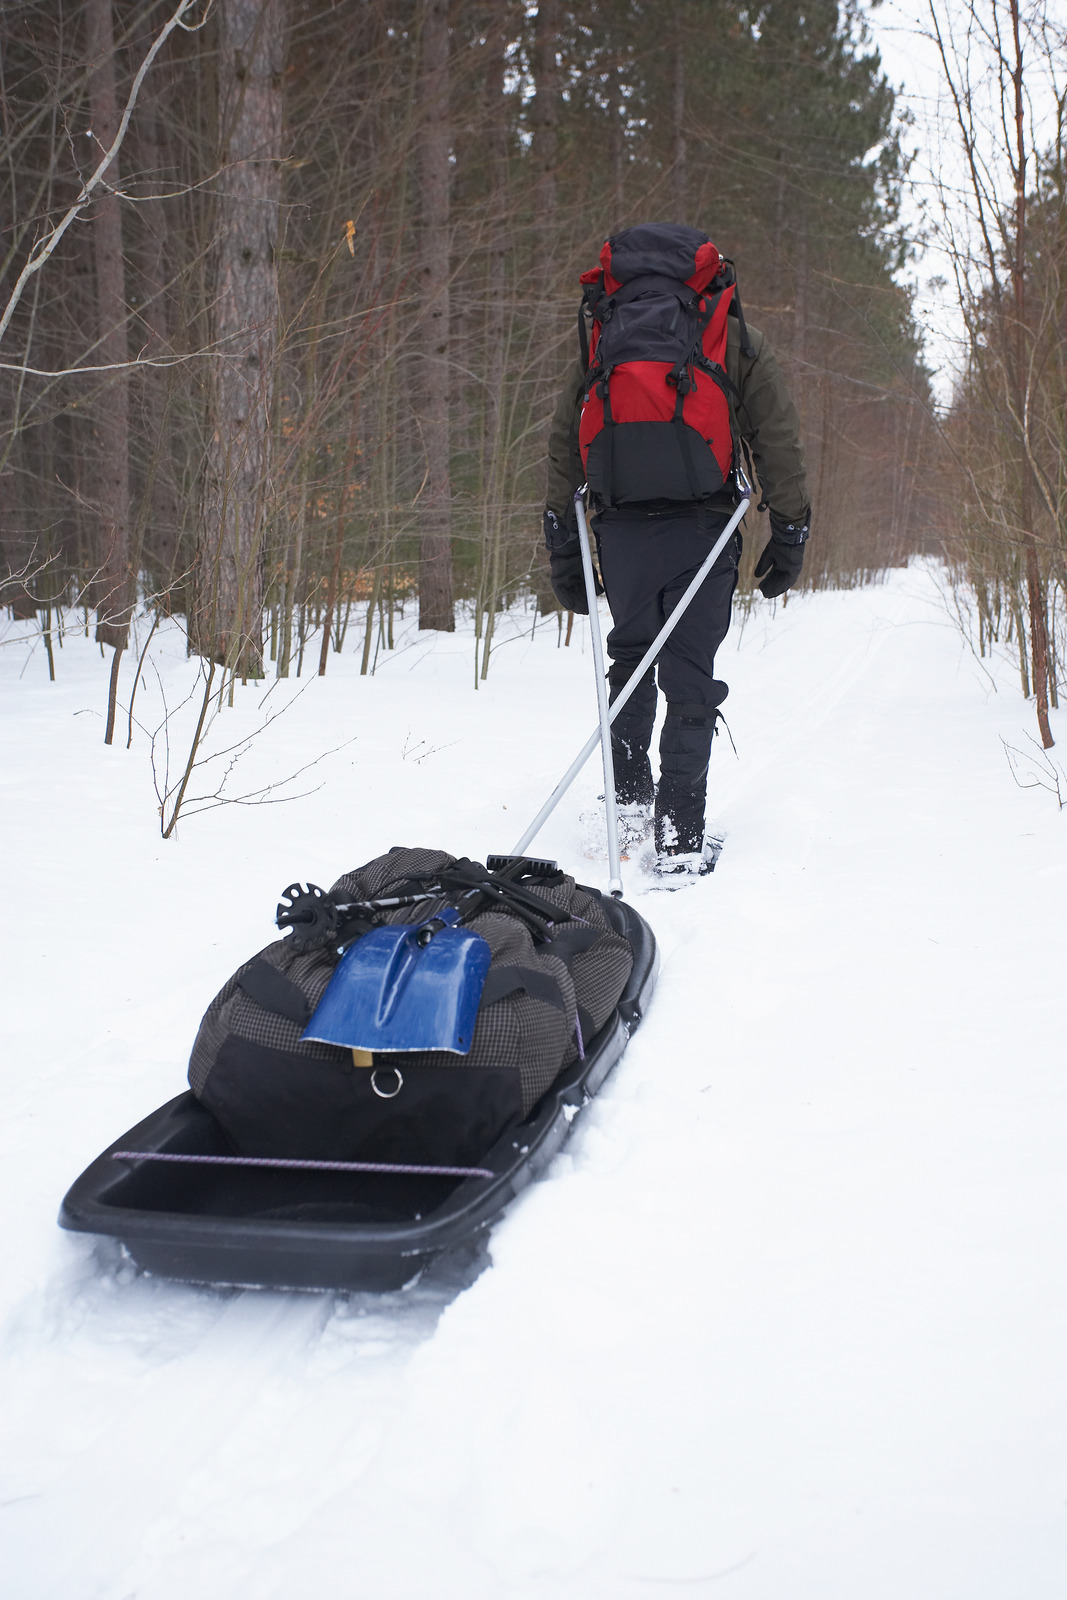 Man pulling sled while snowshoeing